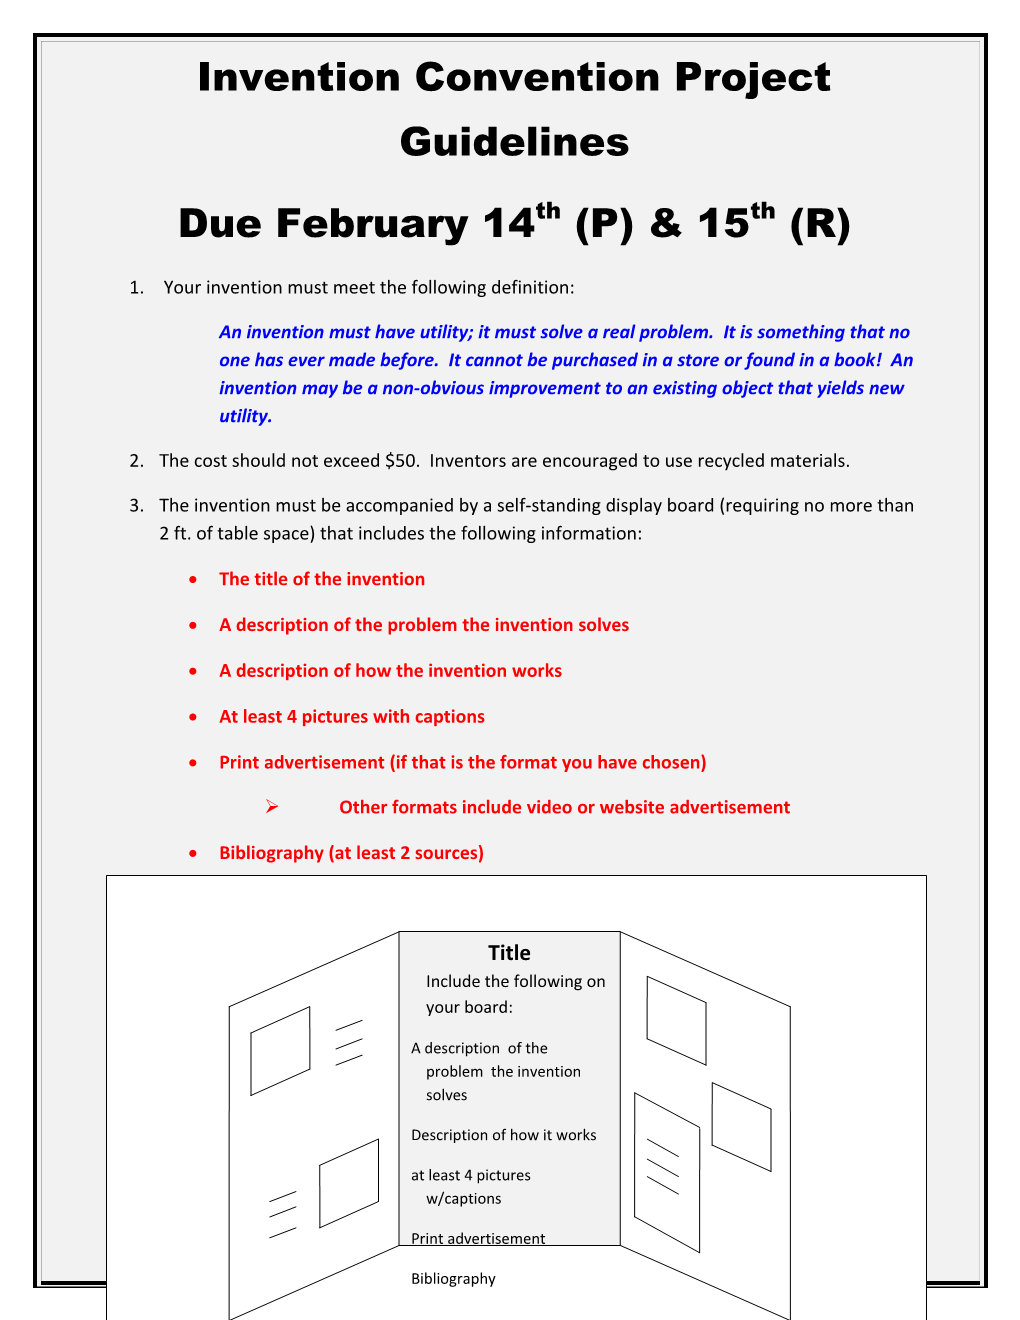 Invention Convention Project Guidelines